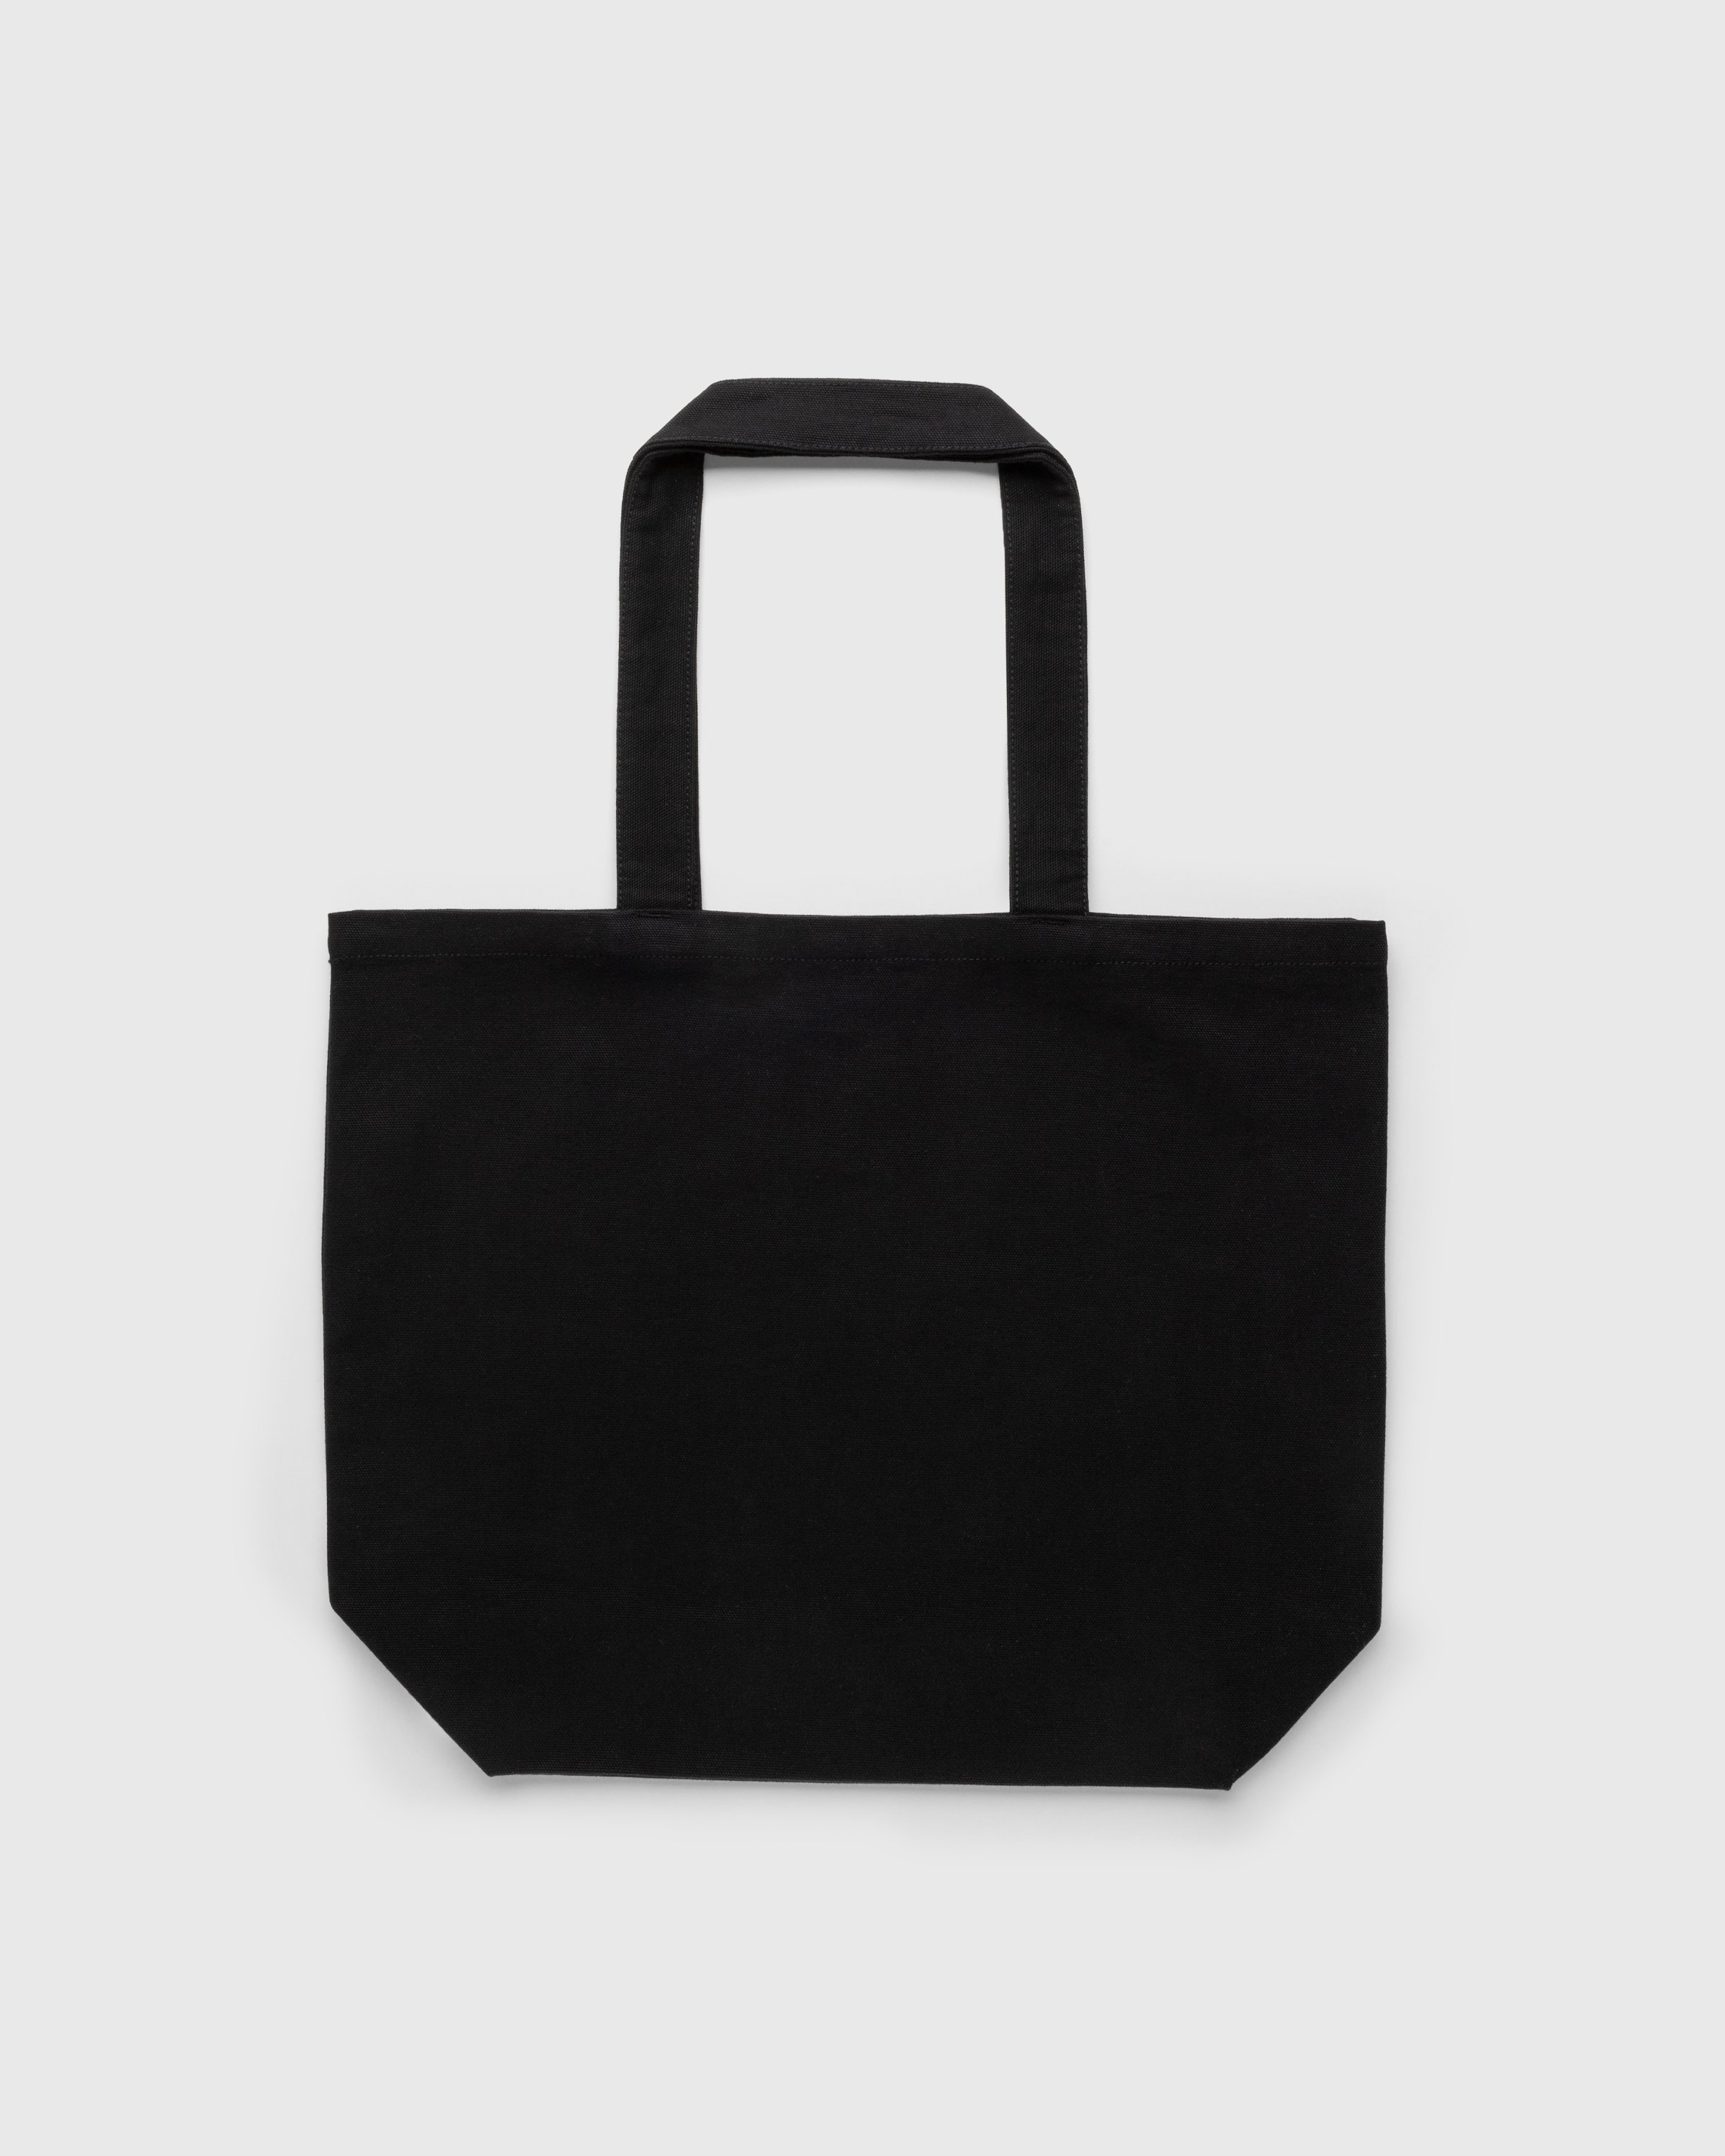 Hotel Amour x Highsnobiety - Not In Paris 4 Tote Bag Black - Accessories - Black - Image 2